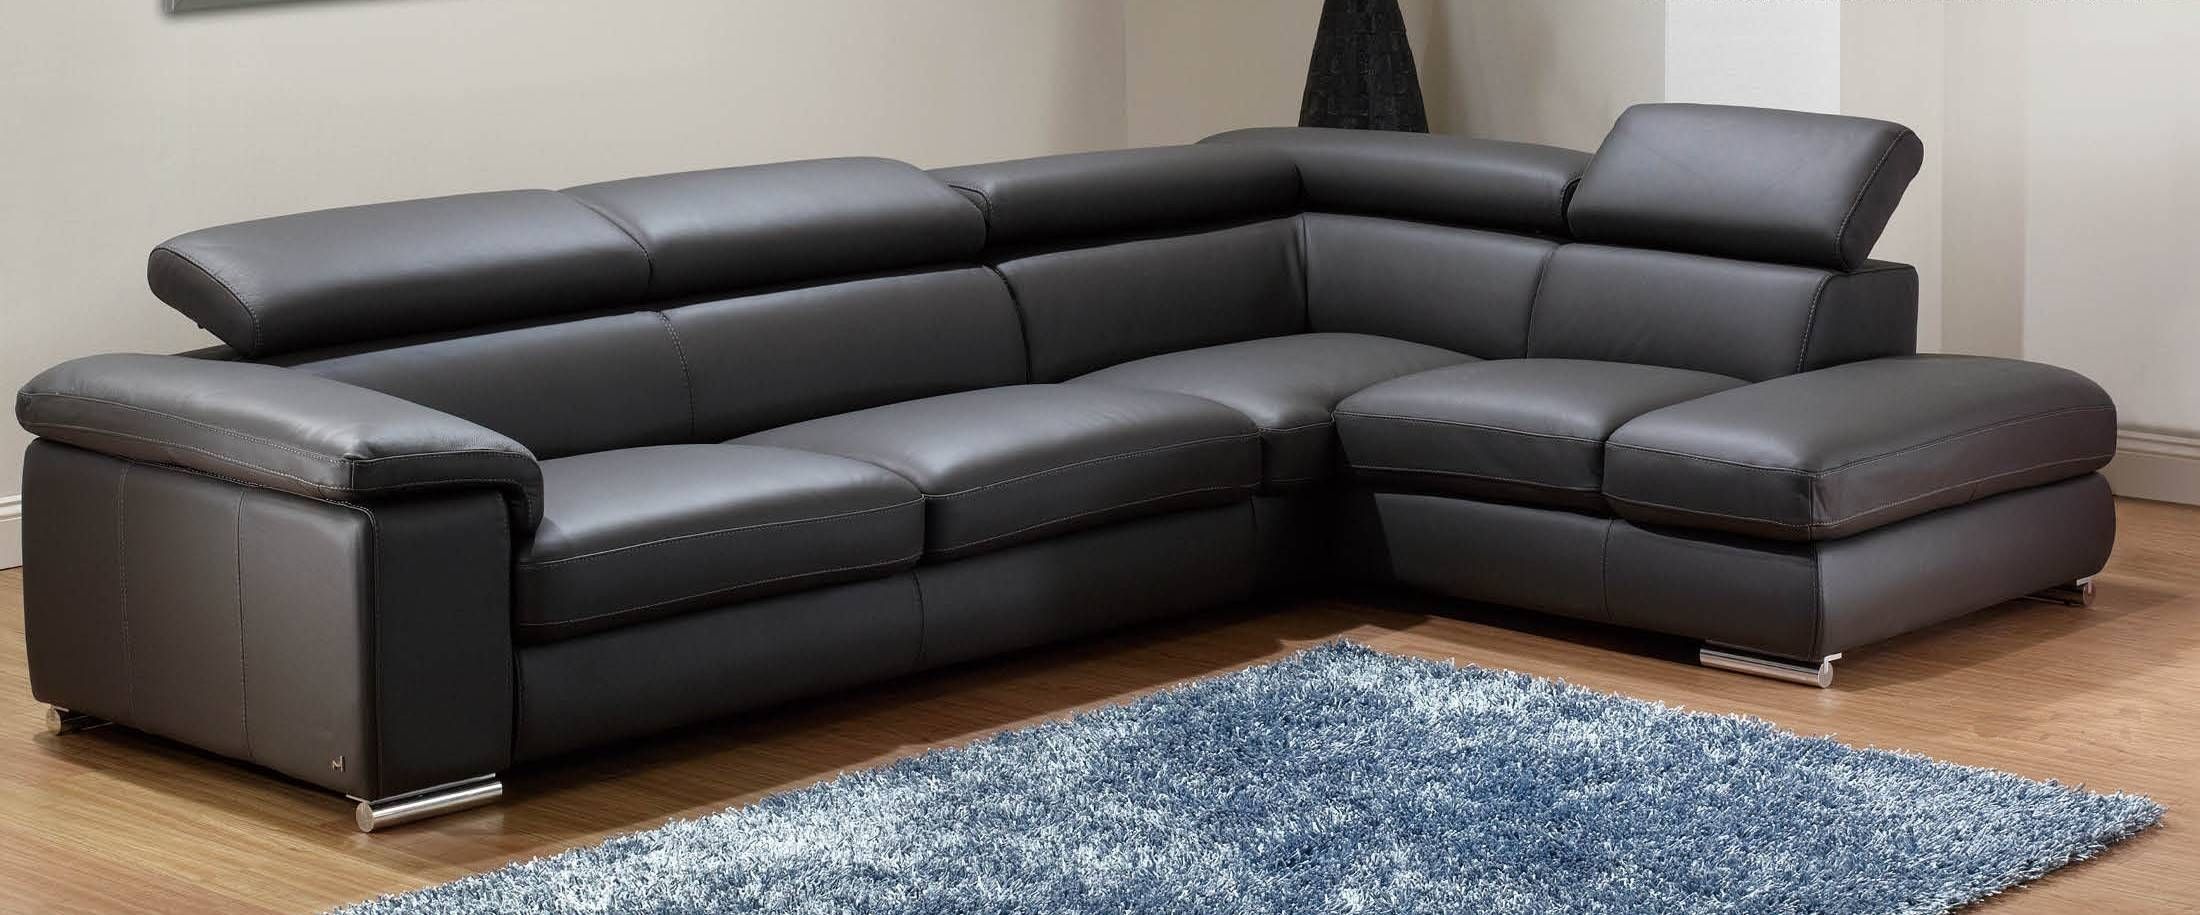 Convertible Sofa Sectional – Leather Sectional Sofa With Black Leather Sectional Sleeper Sofas (View 23 of 30)